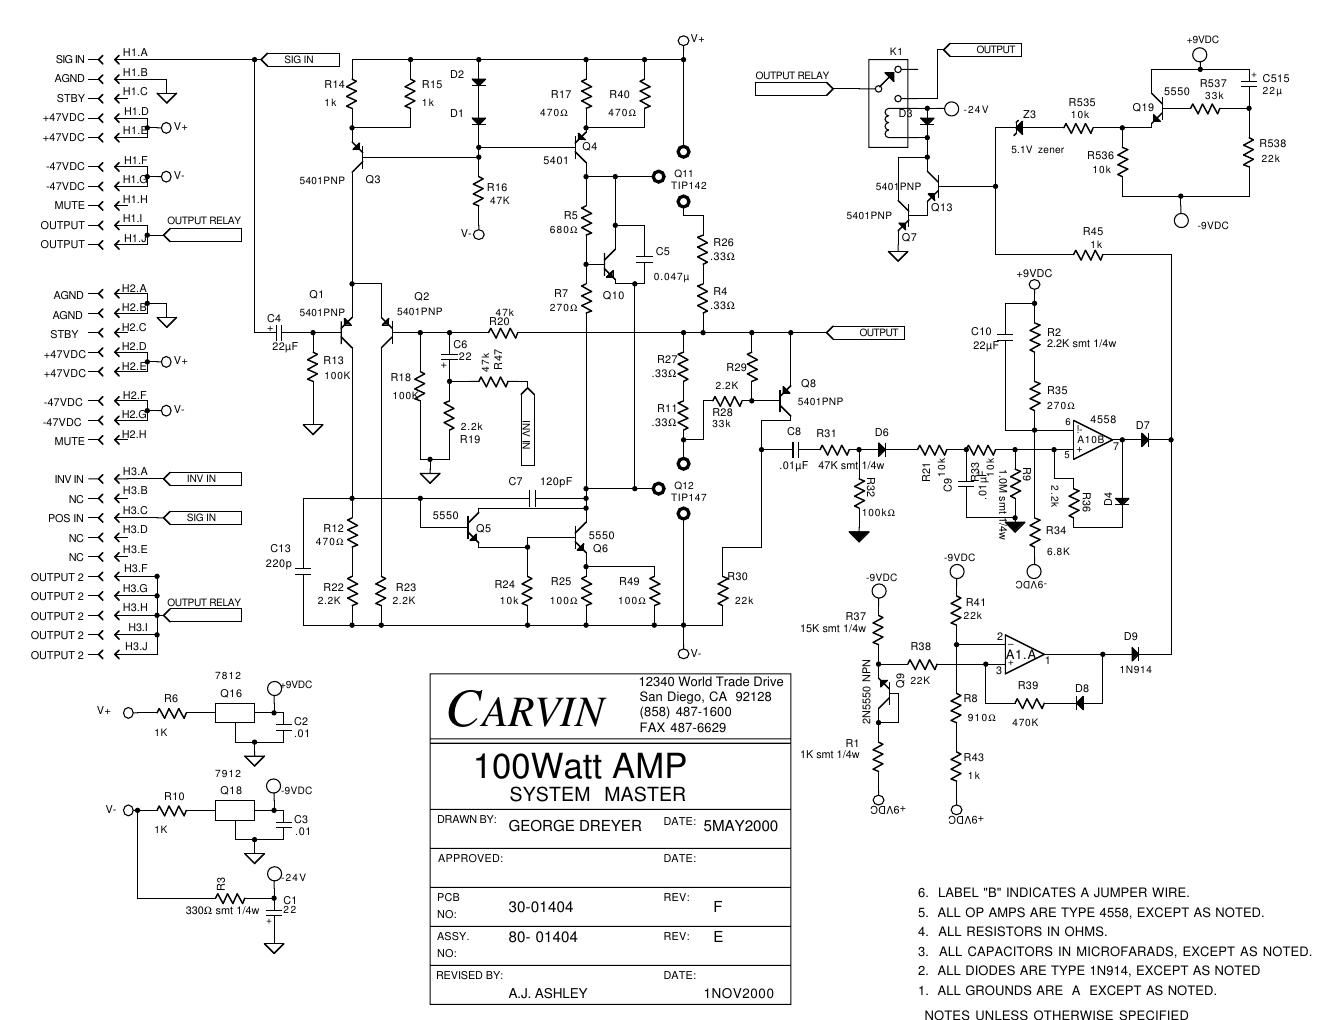 carvin system master schematic